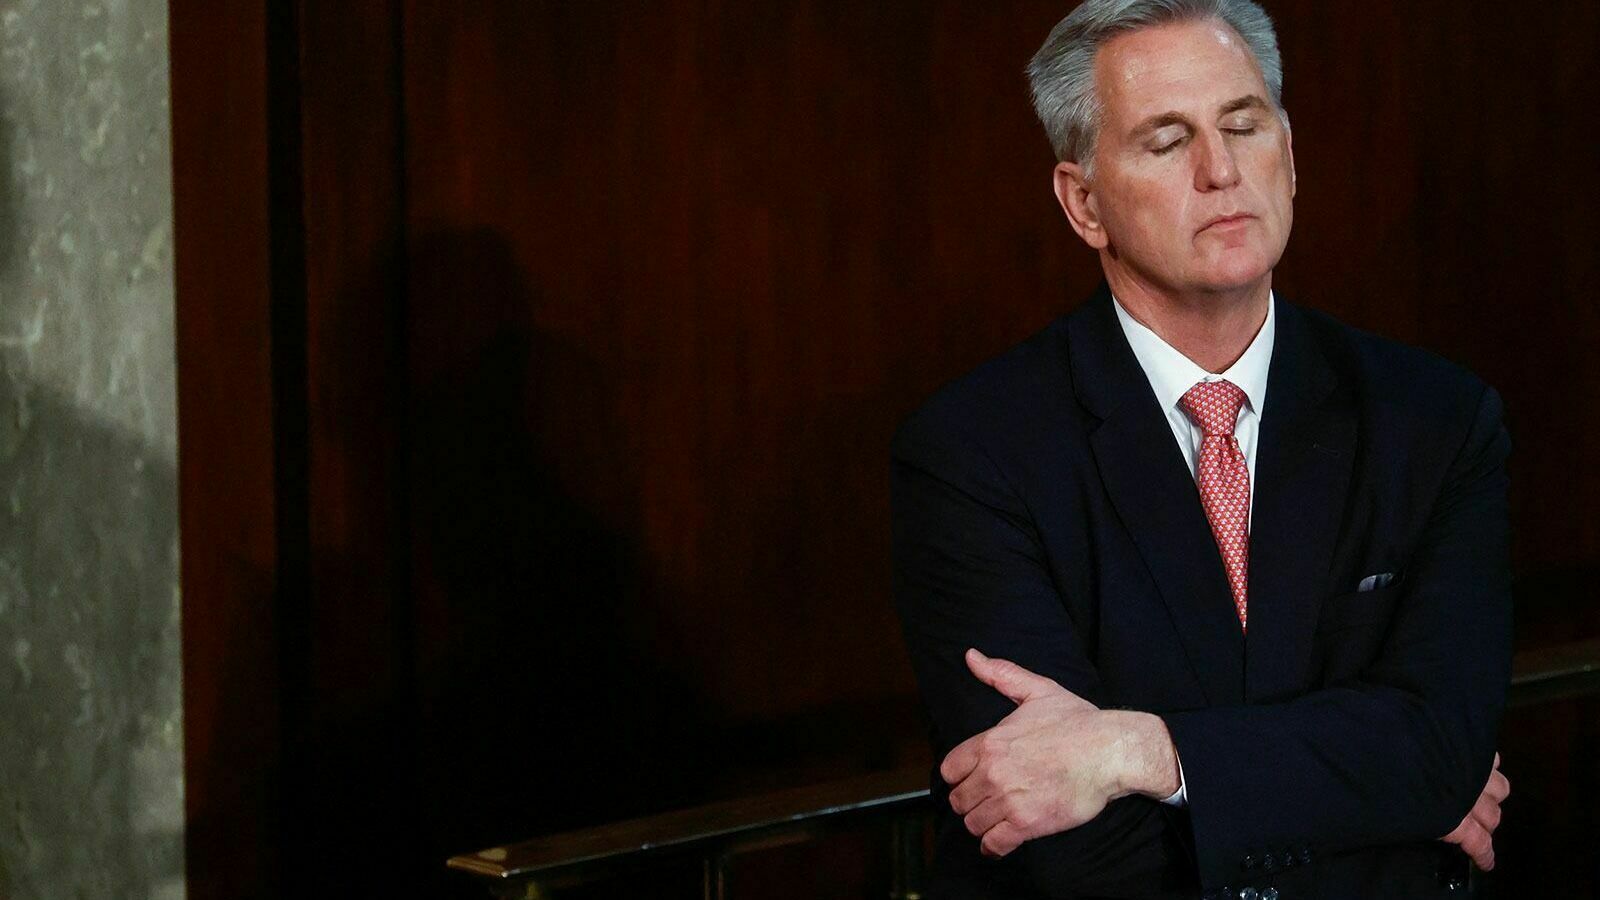 Kiev is outraged by the refusal of Republican Kevin McCarthy to visit Ukraine